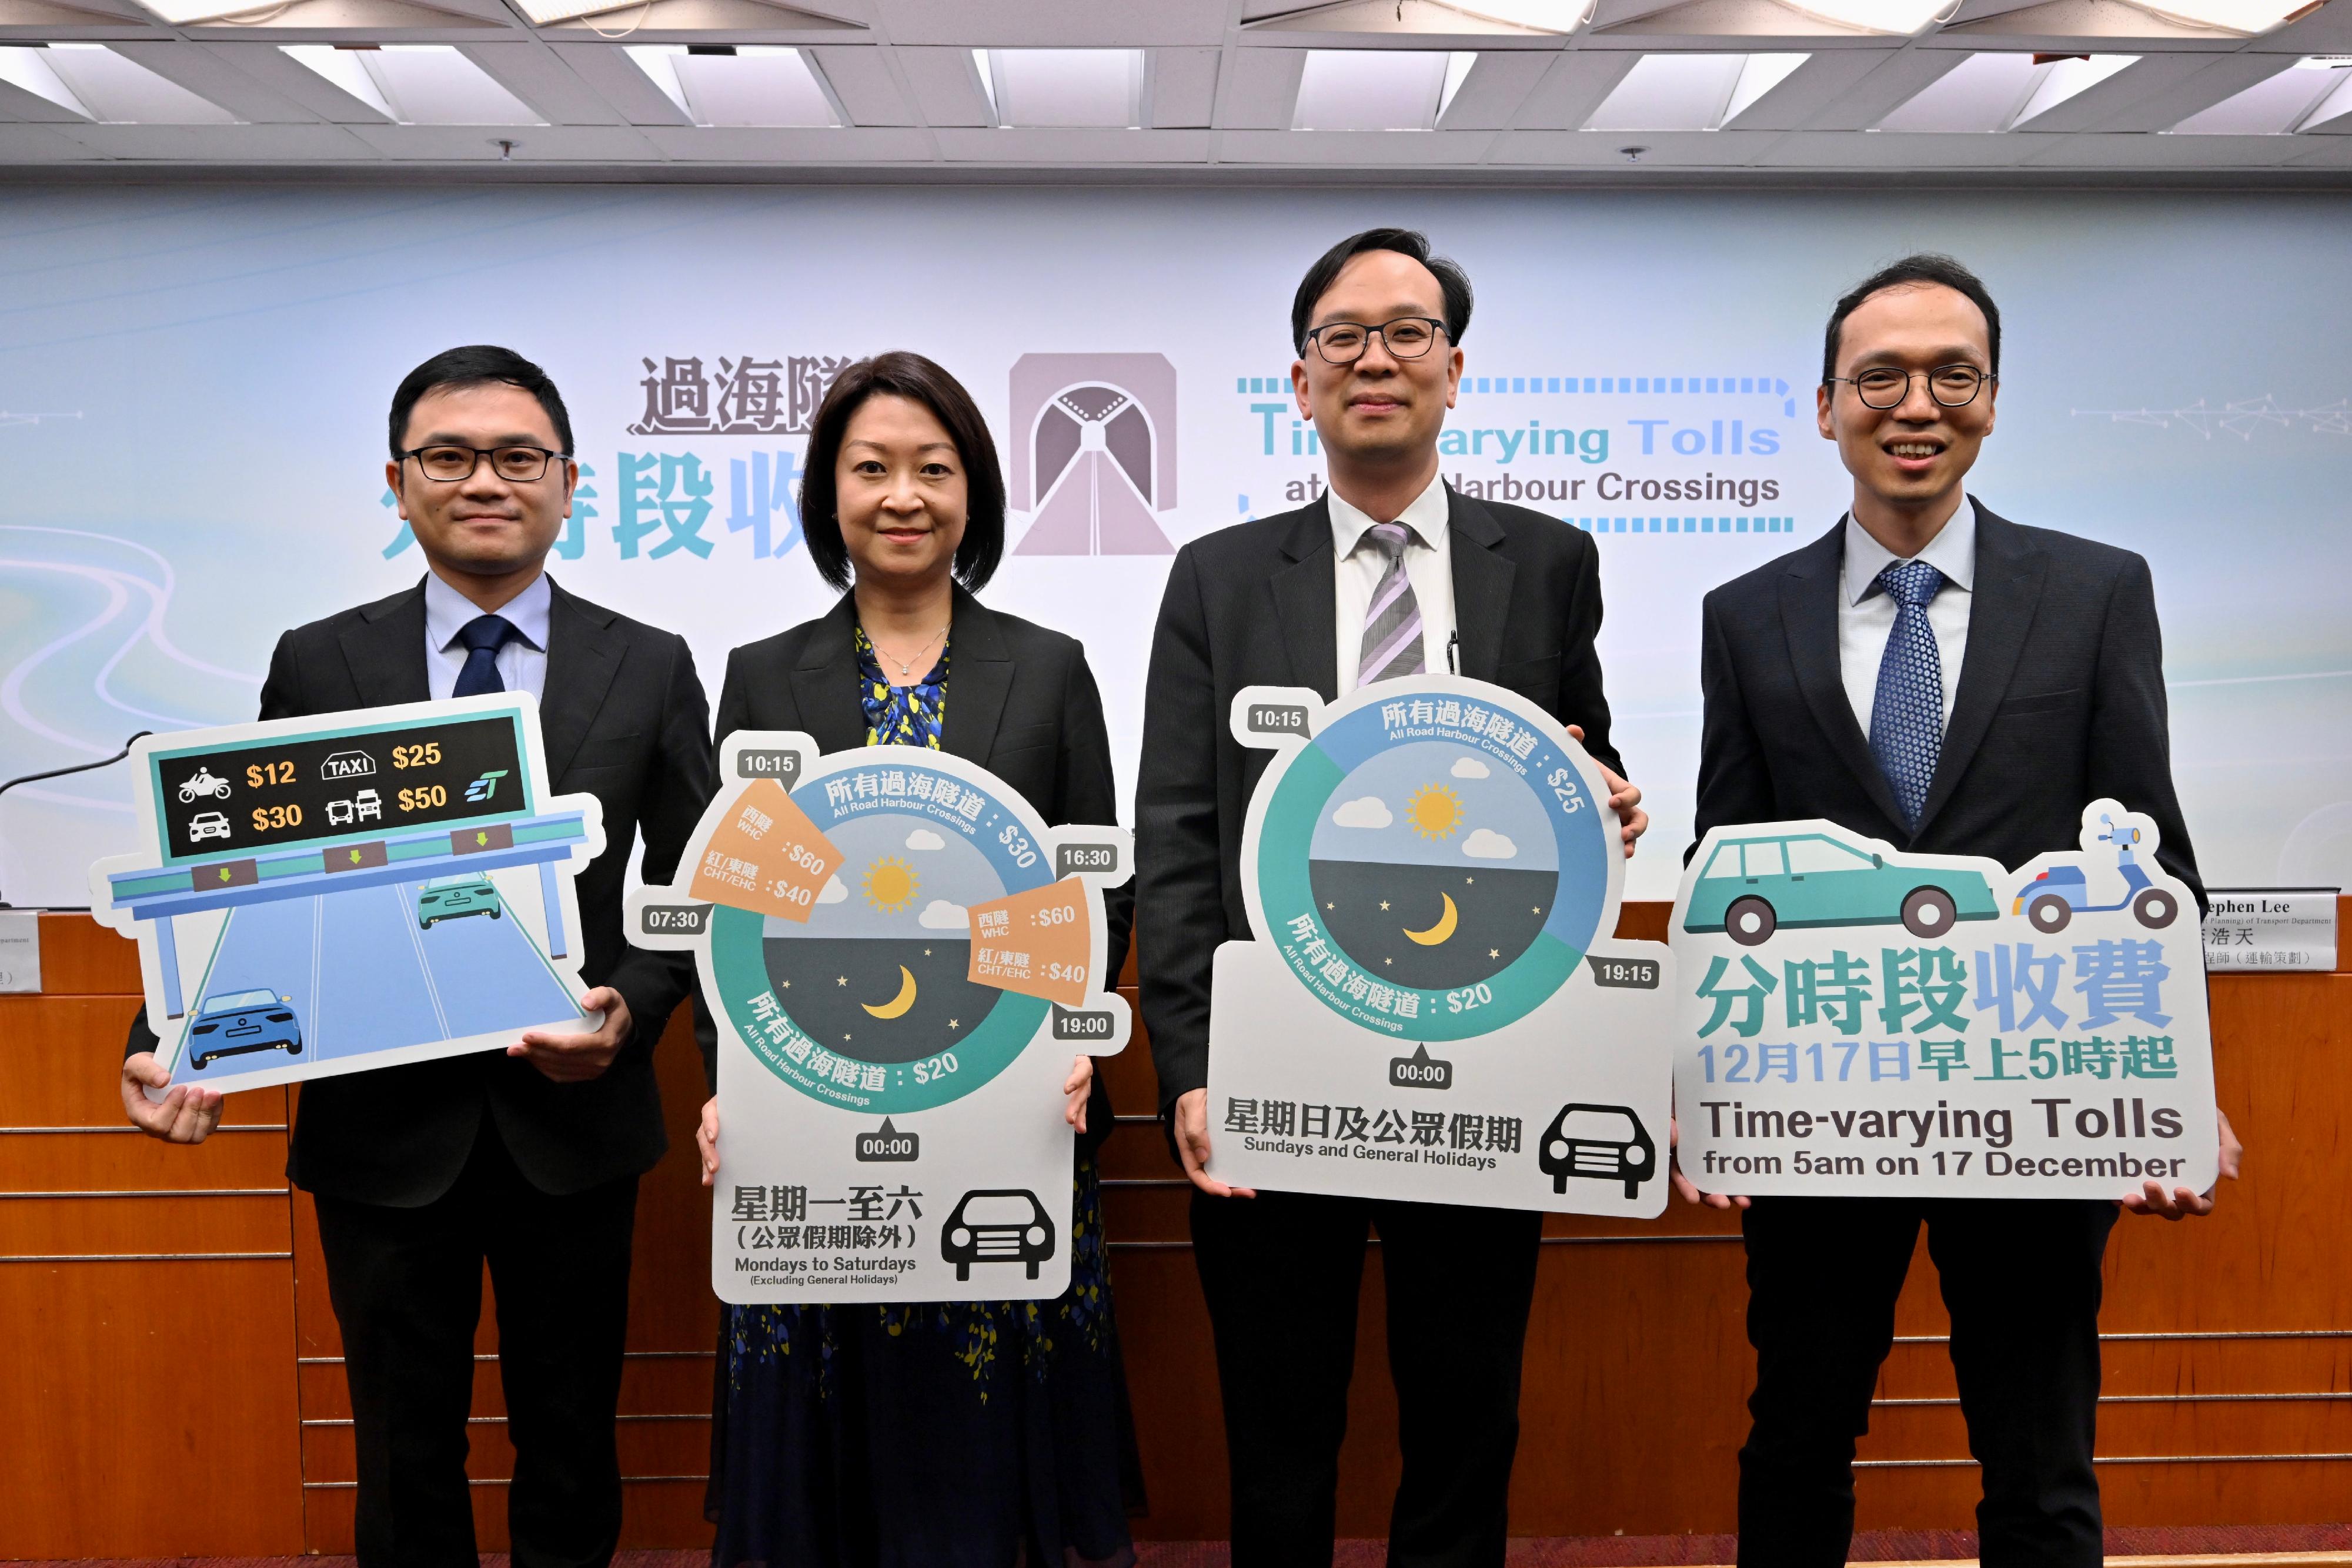 The Commissioner for Transport, Ms Angela Lee (second left); the Assistant Commissioner for Transport (Strategic Studies), Mr Leung Sai-ho (second right); the Chief Engineer (Transport Planning), Mr Stephen Lee (first right); and the Principal Transport Officer (Management), Mr Albert Ho (first left), of the Transport Department held a press briefing today (December 13) to introduce the time-varying toll implementation in the three road harbour crossings from 5am on December 17.